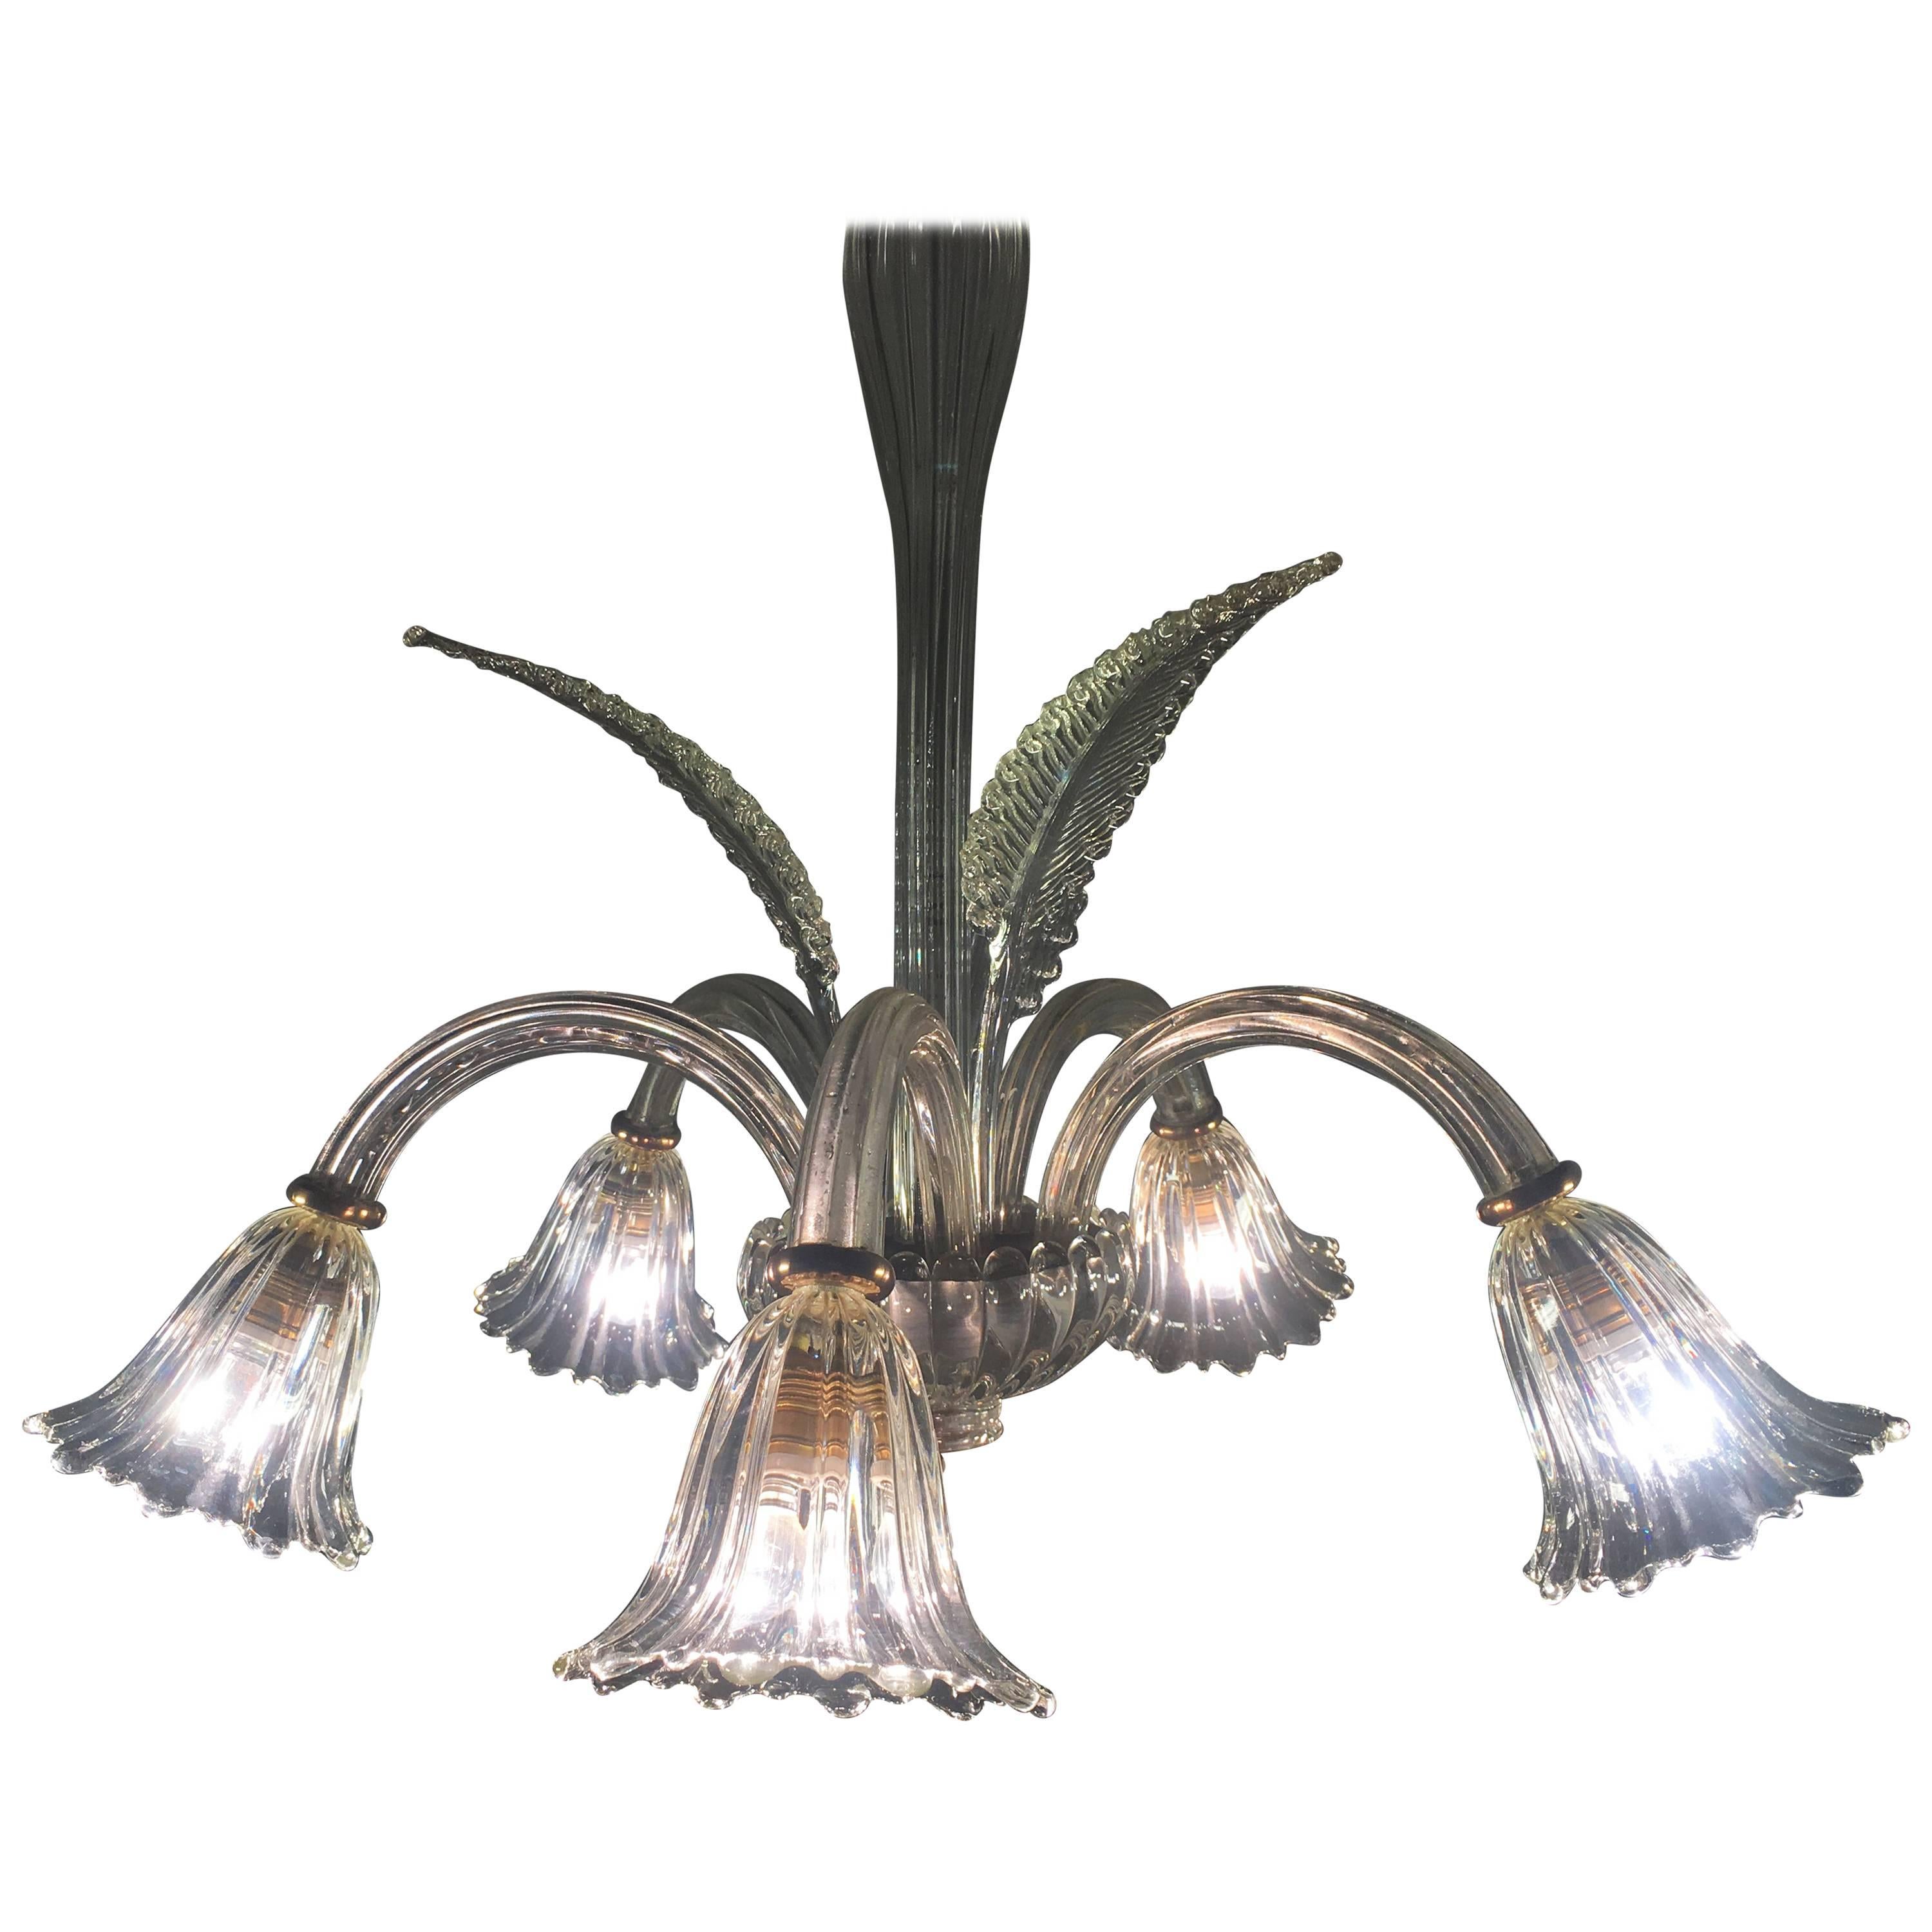 Liberty Chandelier by Ercole Barovier, Murano, 1940s For Sale